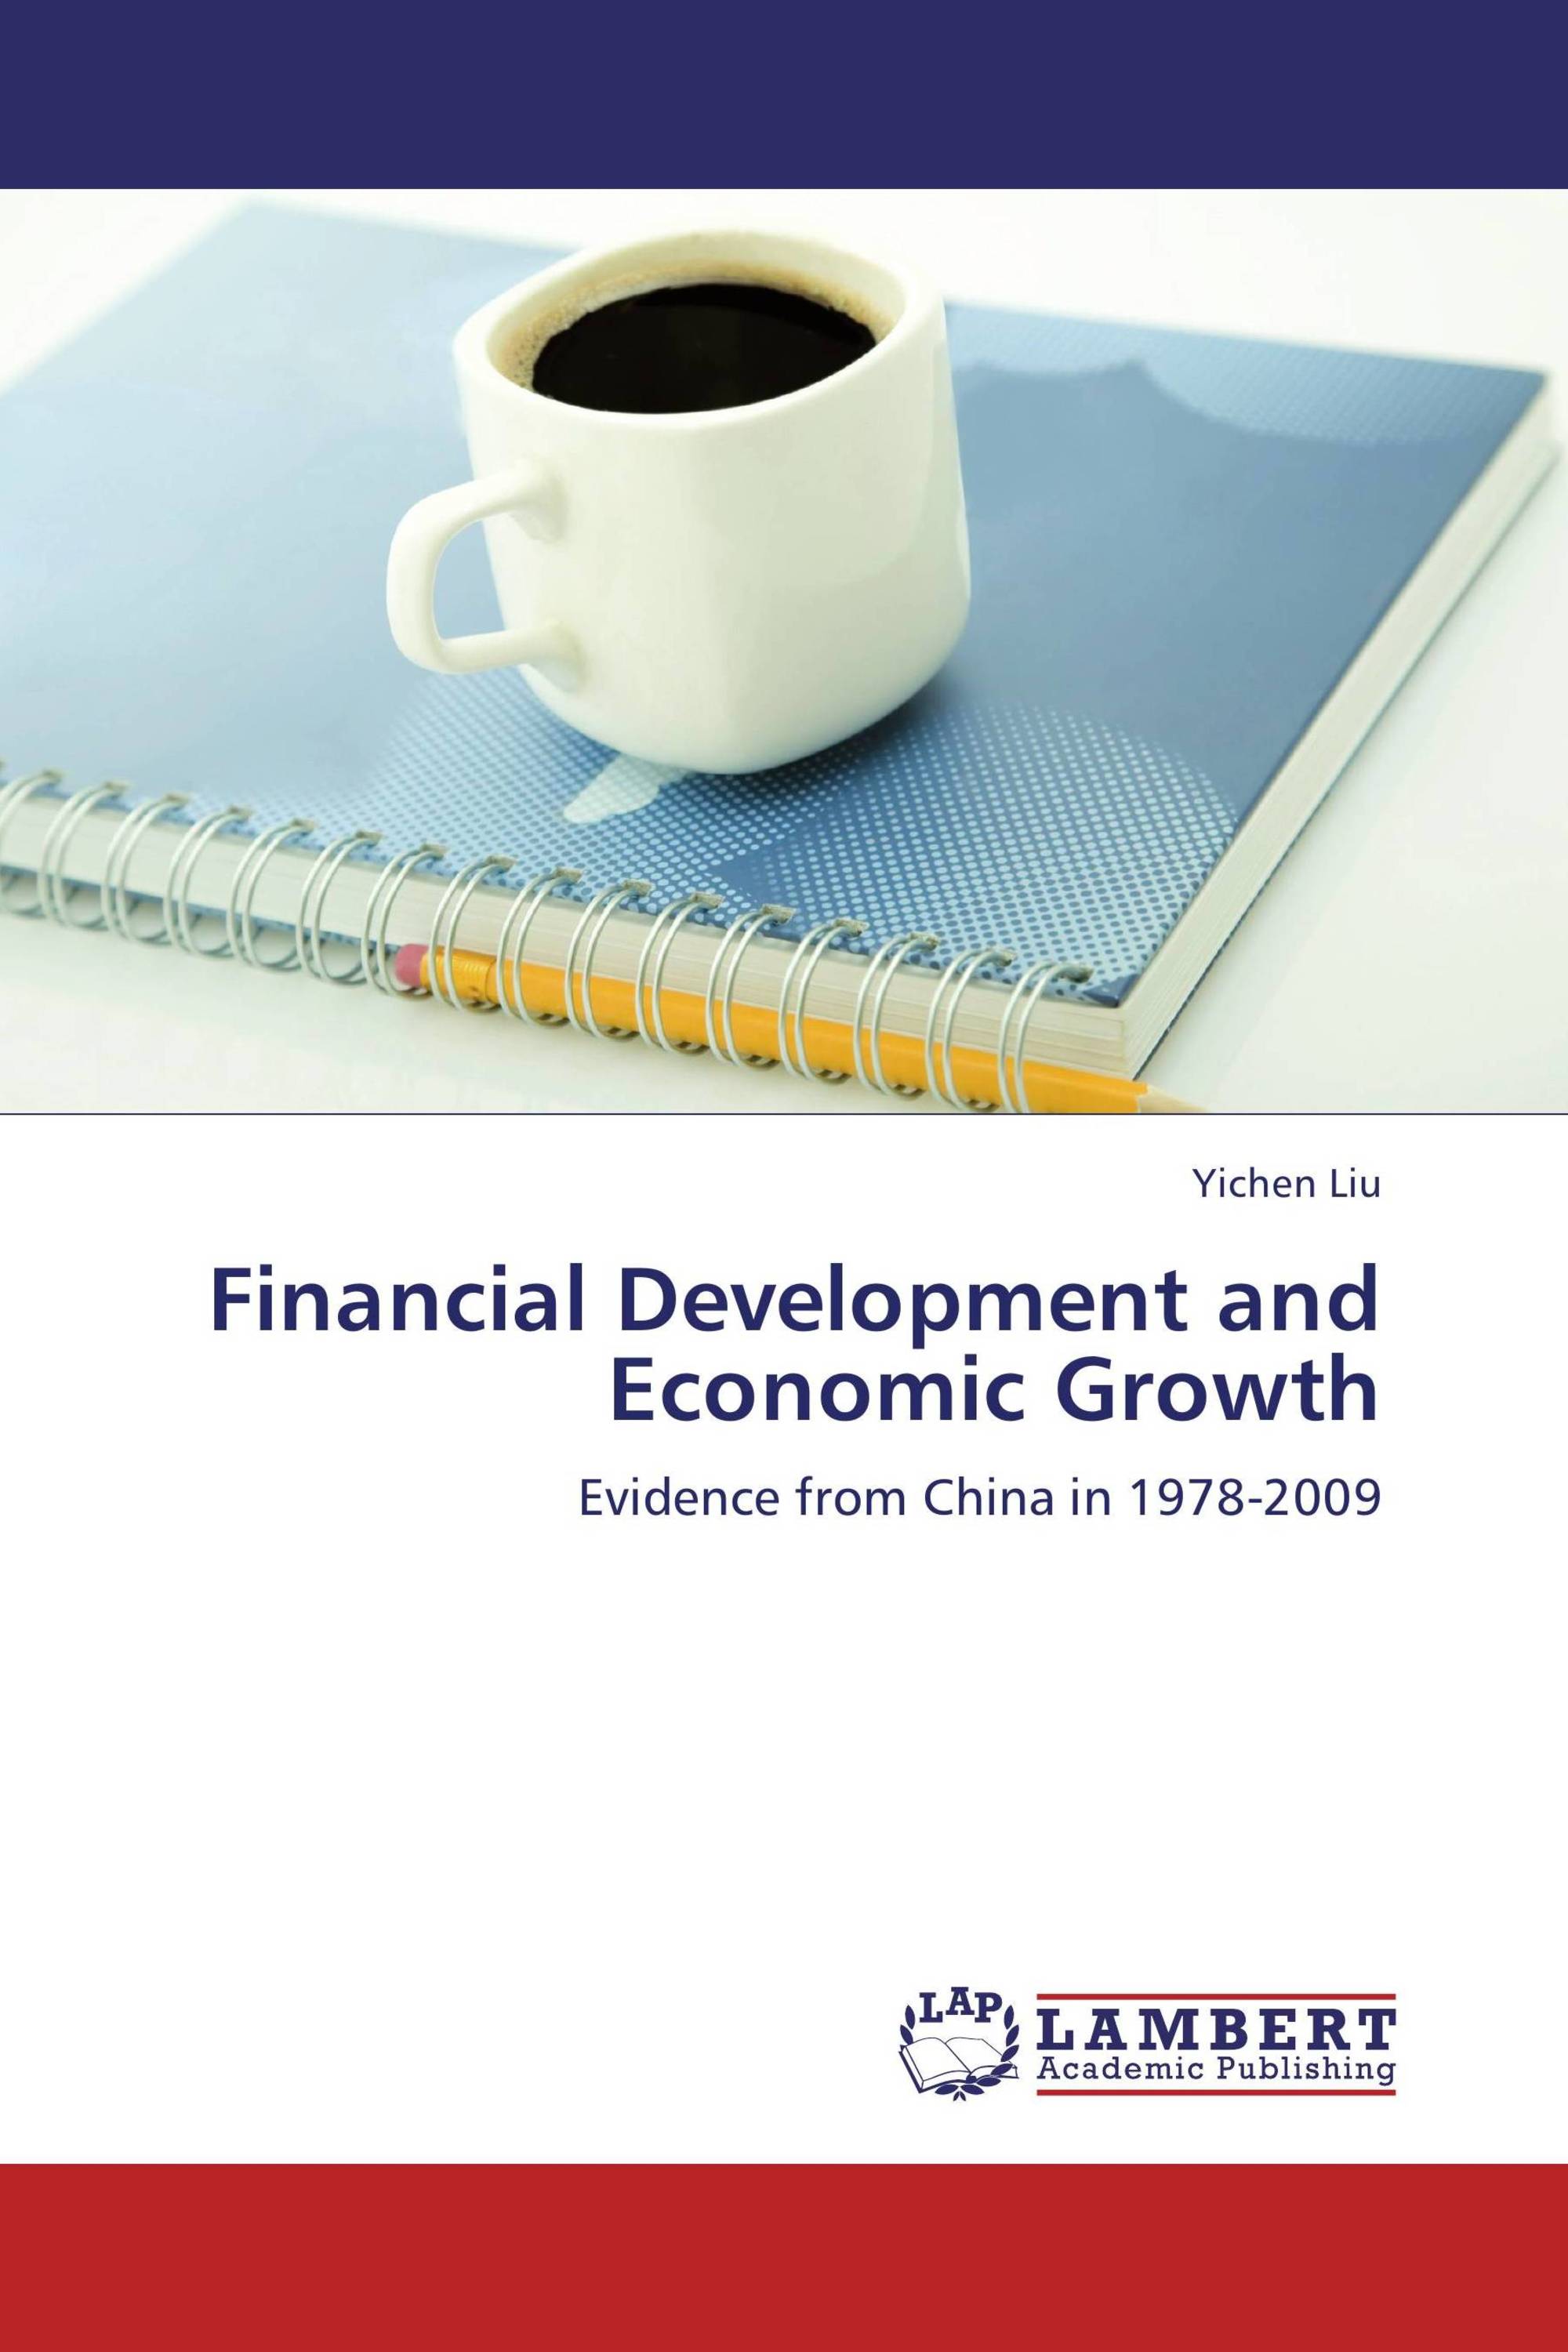 financial development and economic growth thesis